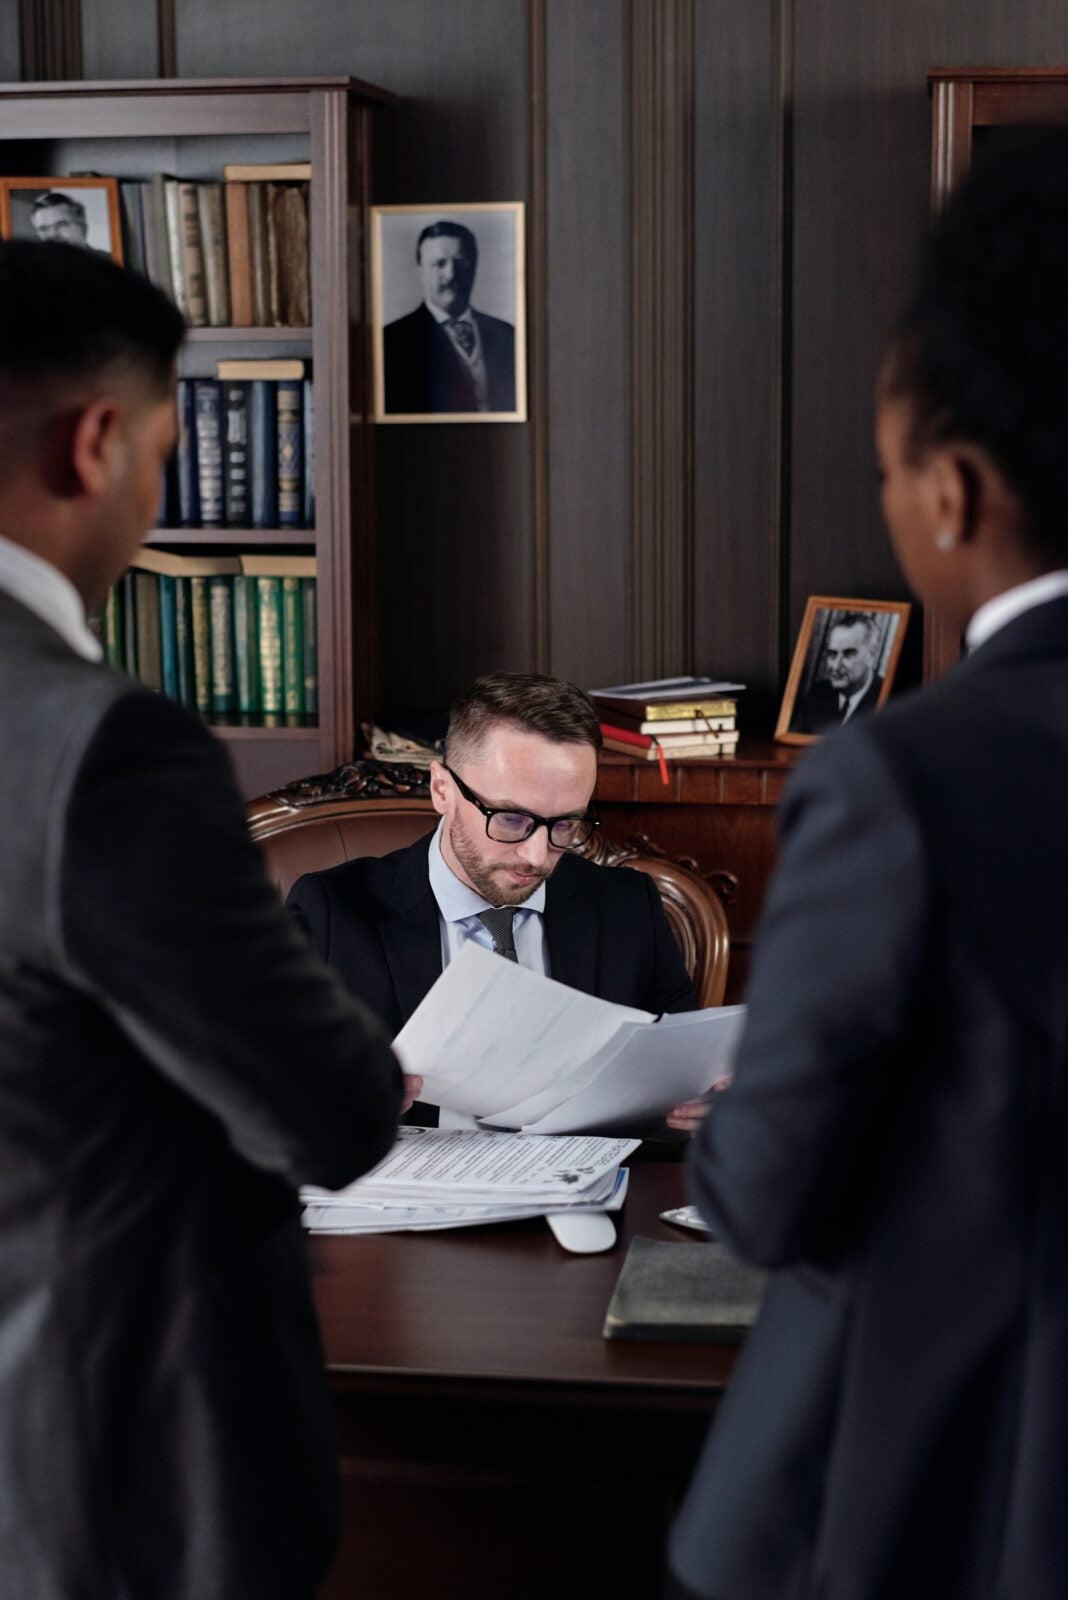 A man sitting behind a desk looking at several pieces of paper while two men facing him in front of the desk. They are wearing suits.